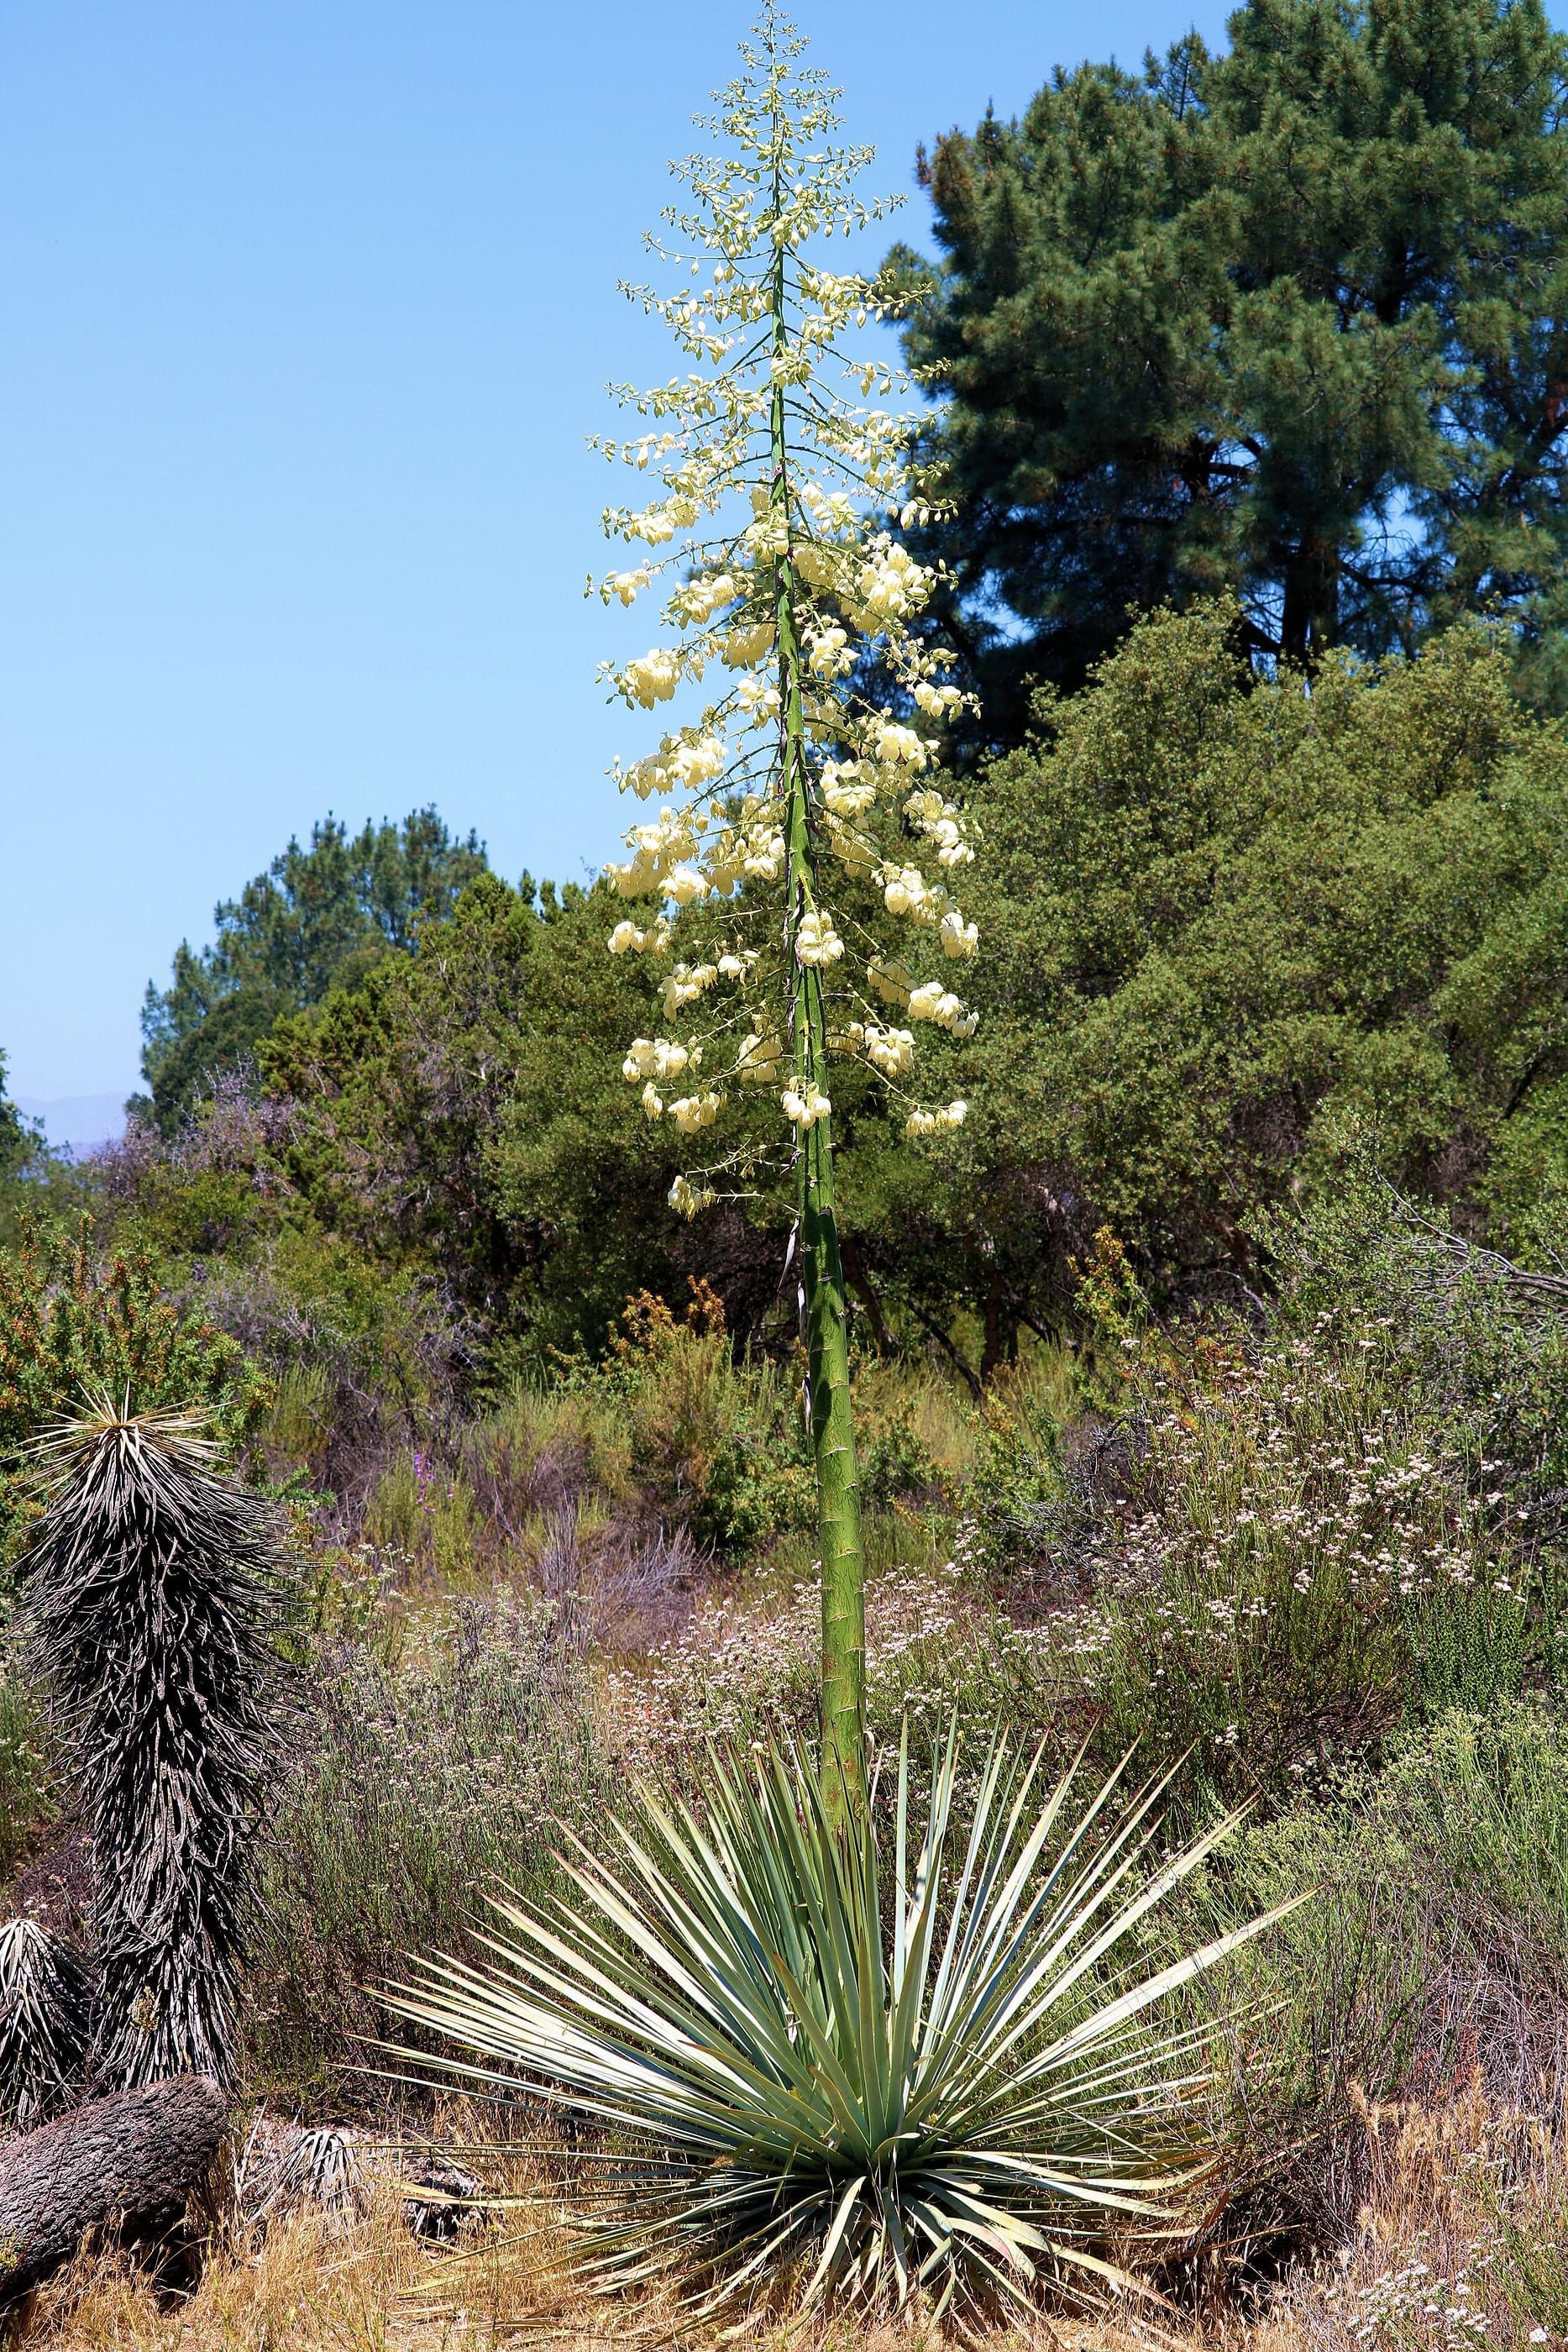 A spiky green yucca plant with a tall blossom